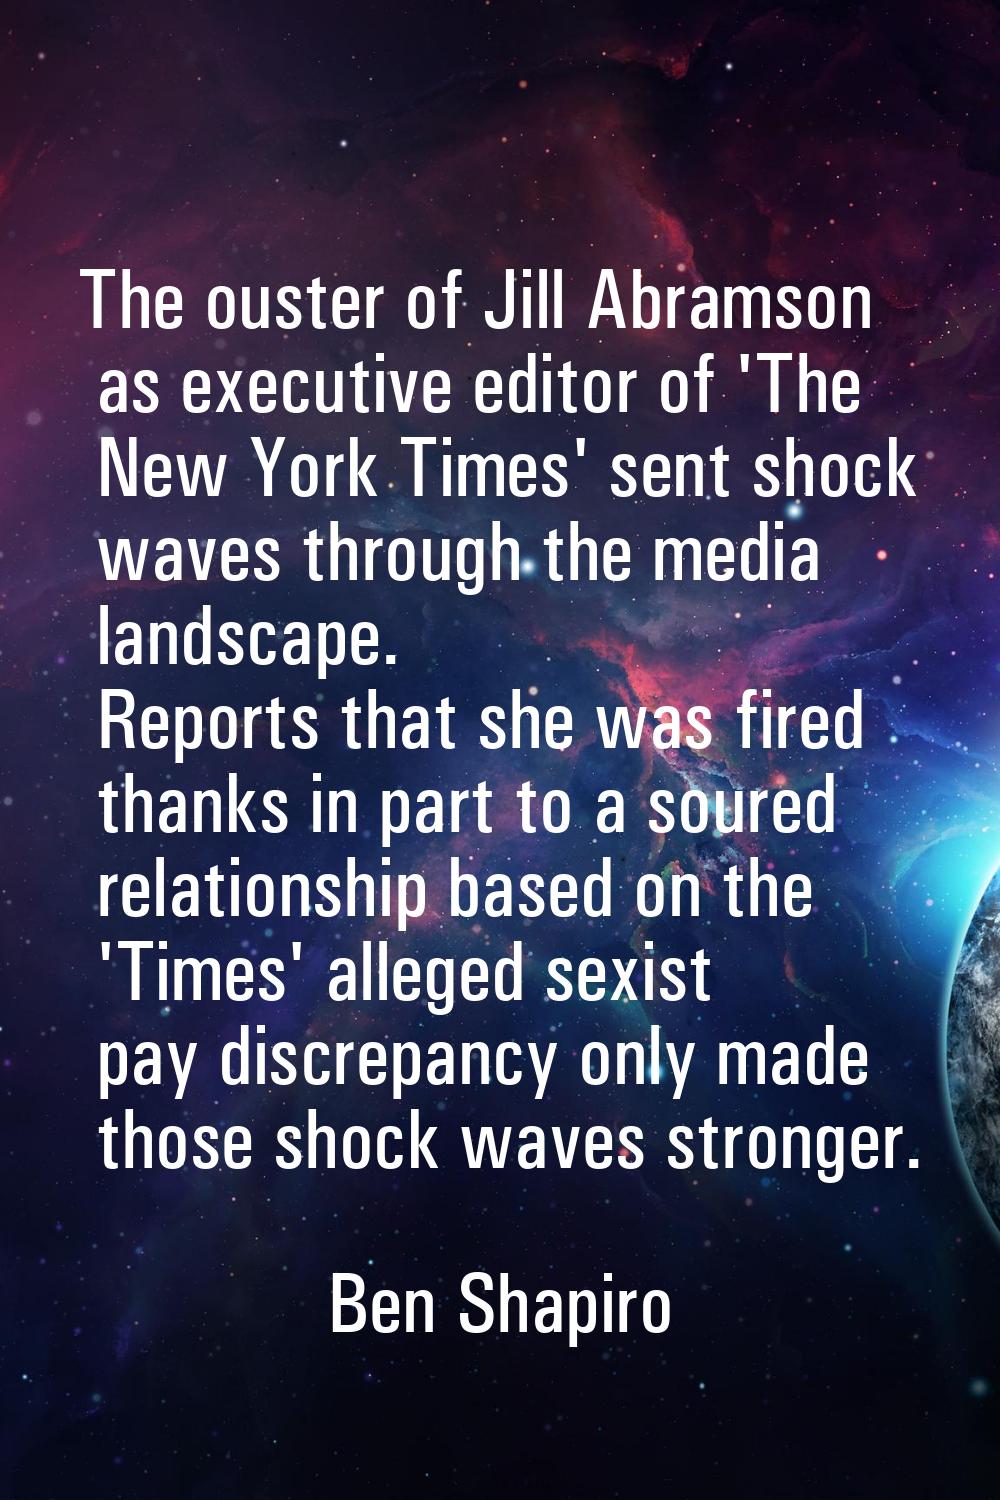 The ouster of Jill Abramson as executive editor of 'The New York Times' sent shock waves through th